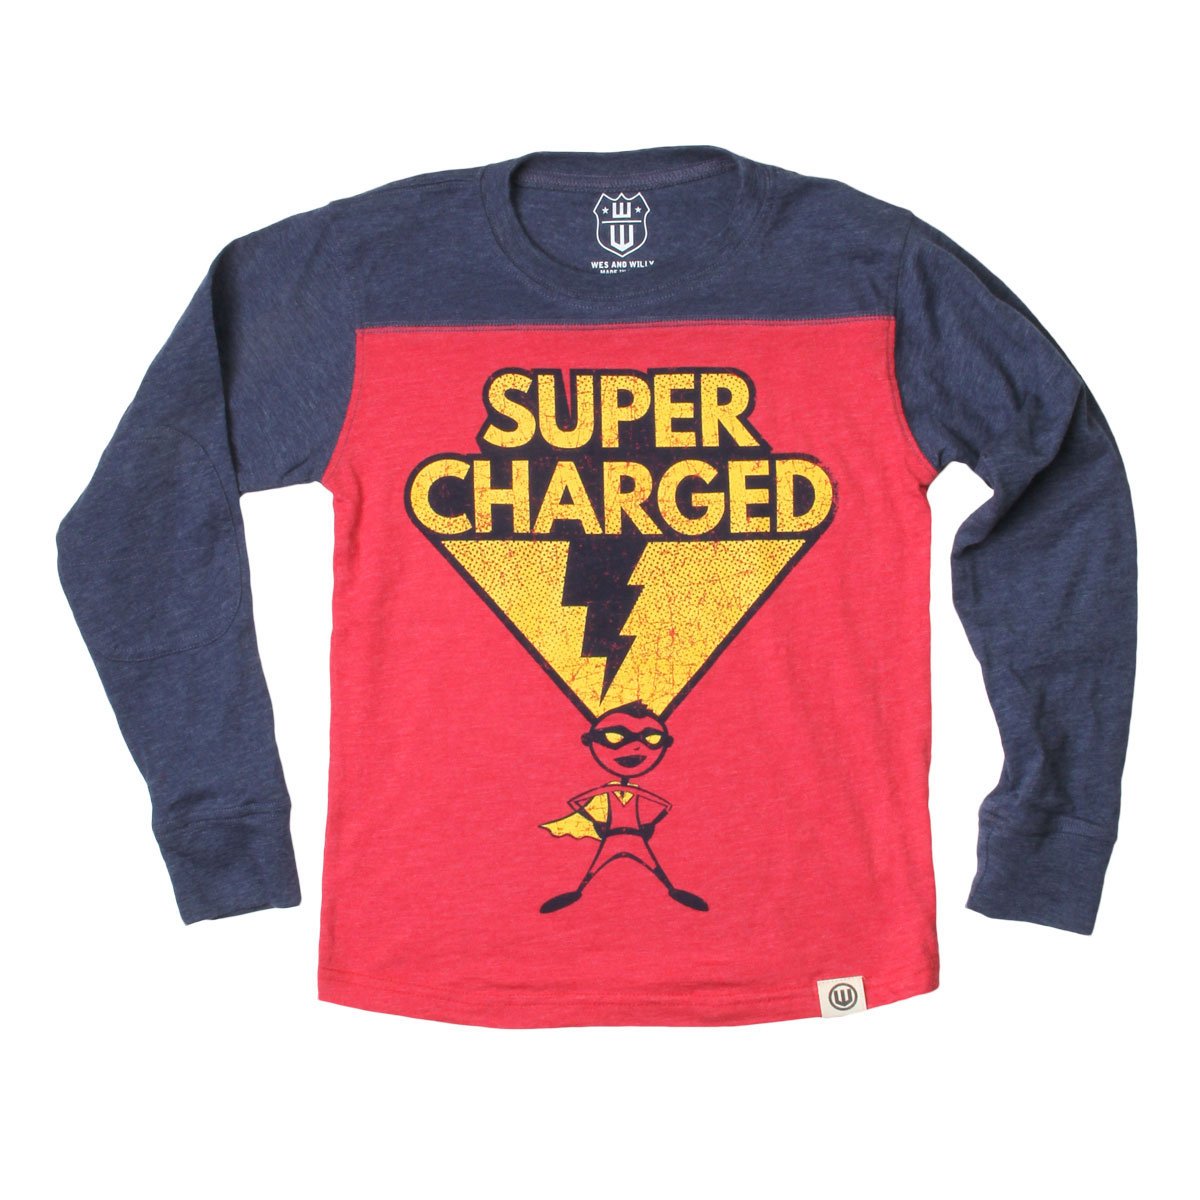 Boys' Super Charged Shirt by Wes and Willy